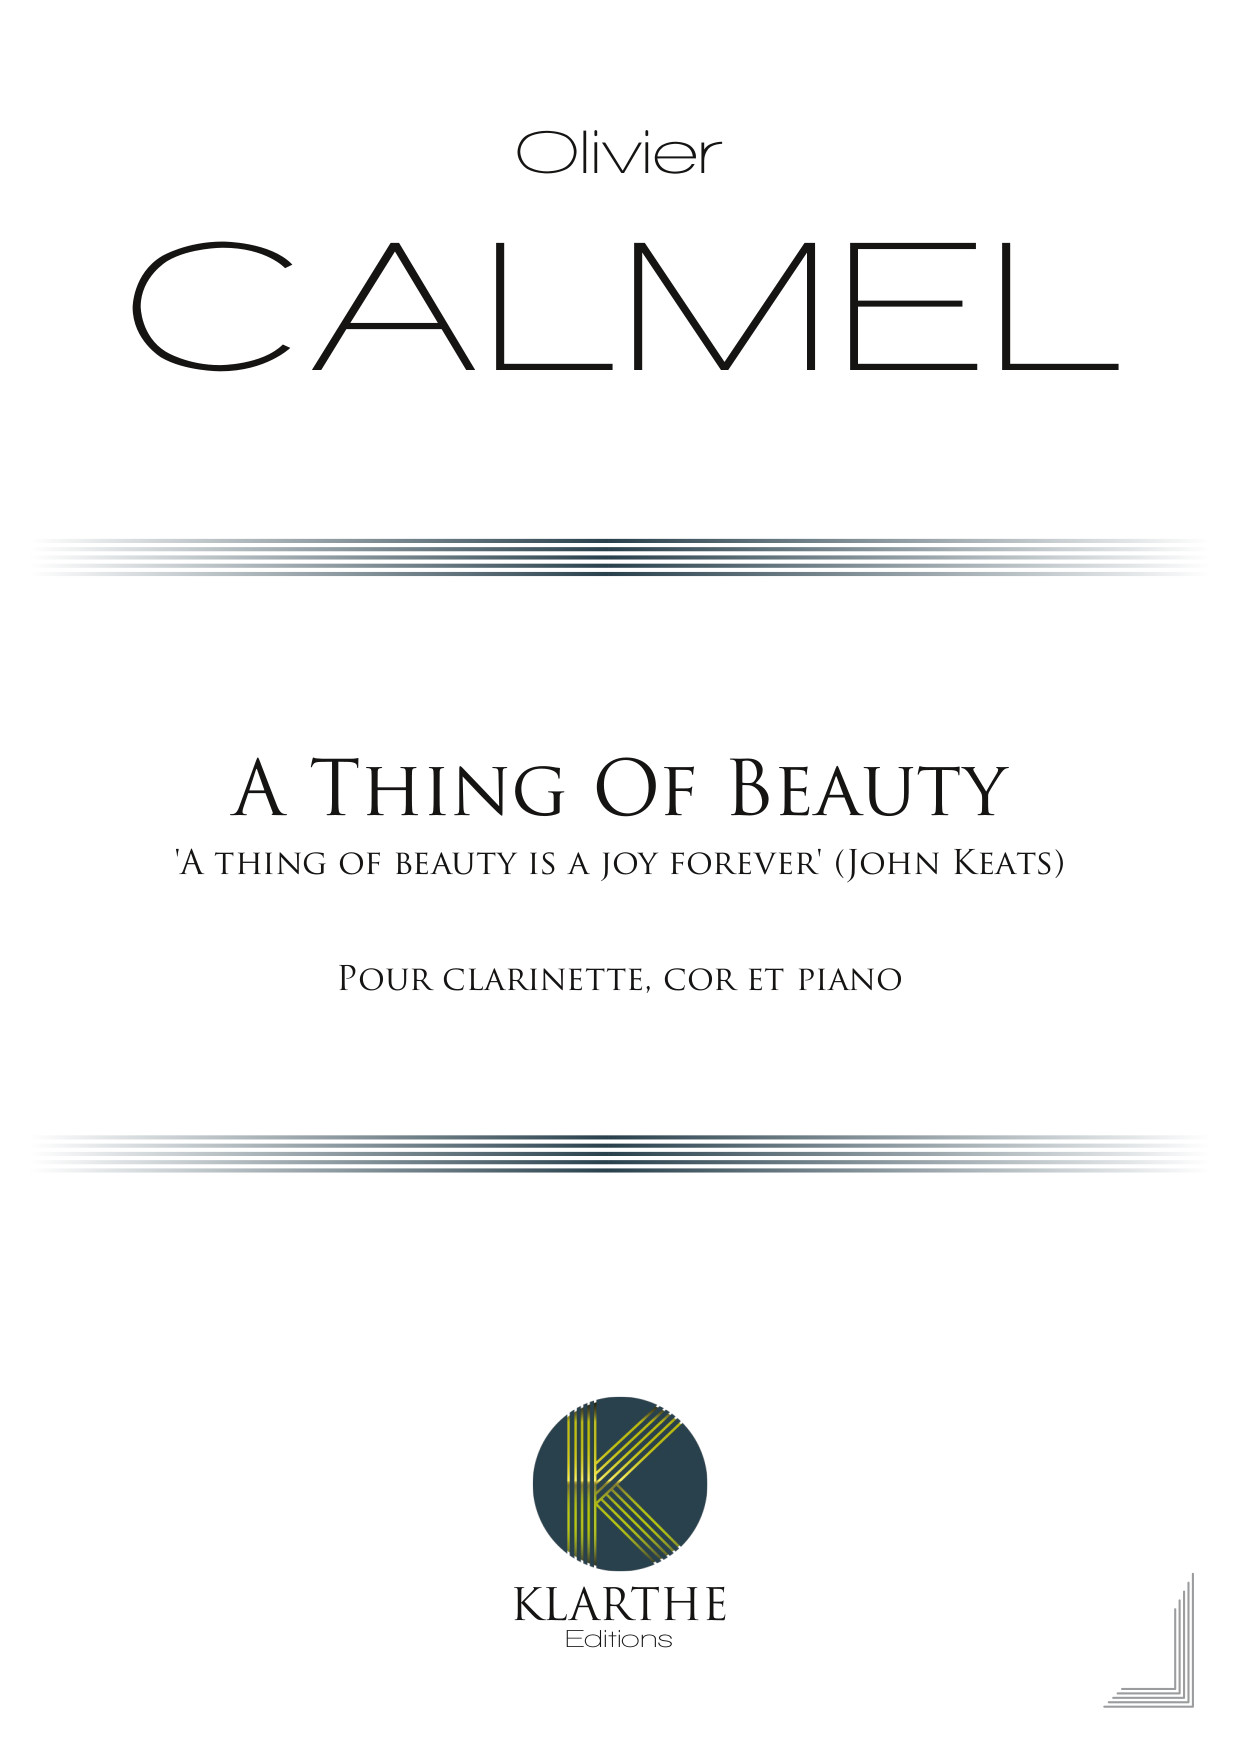 A Thing Of Beauty (CALMEL OLIVIER)